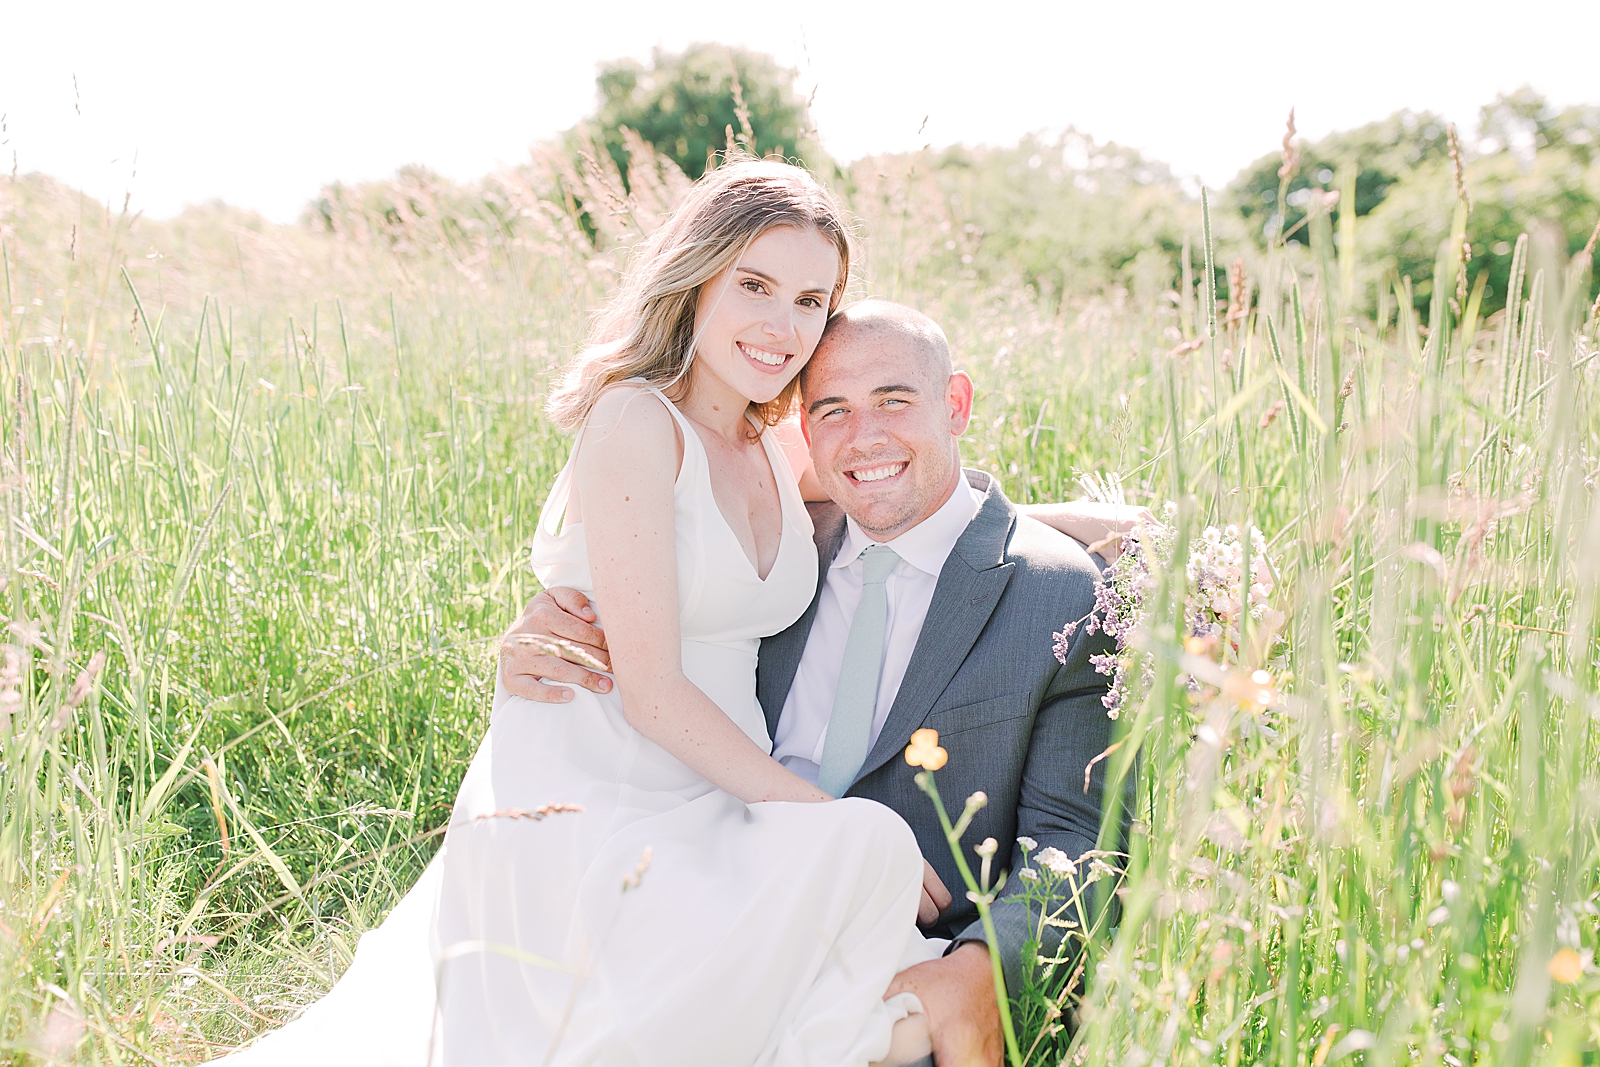 Max Patch Elopement Bride and Groom Sitting in Tall Grass Photo